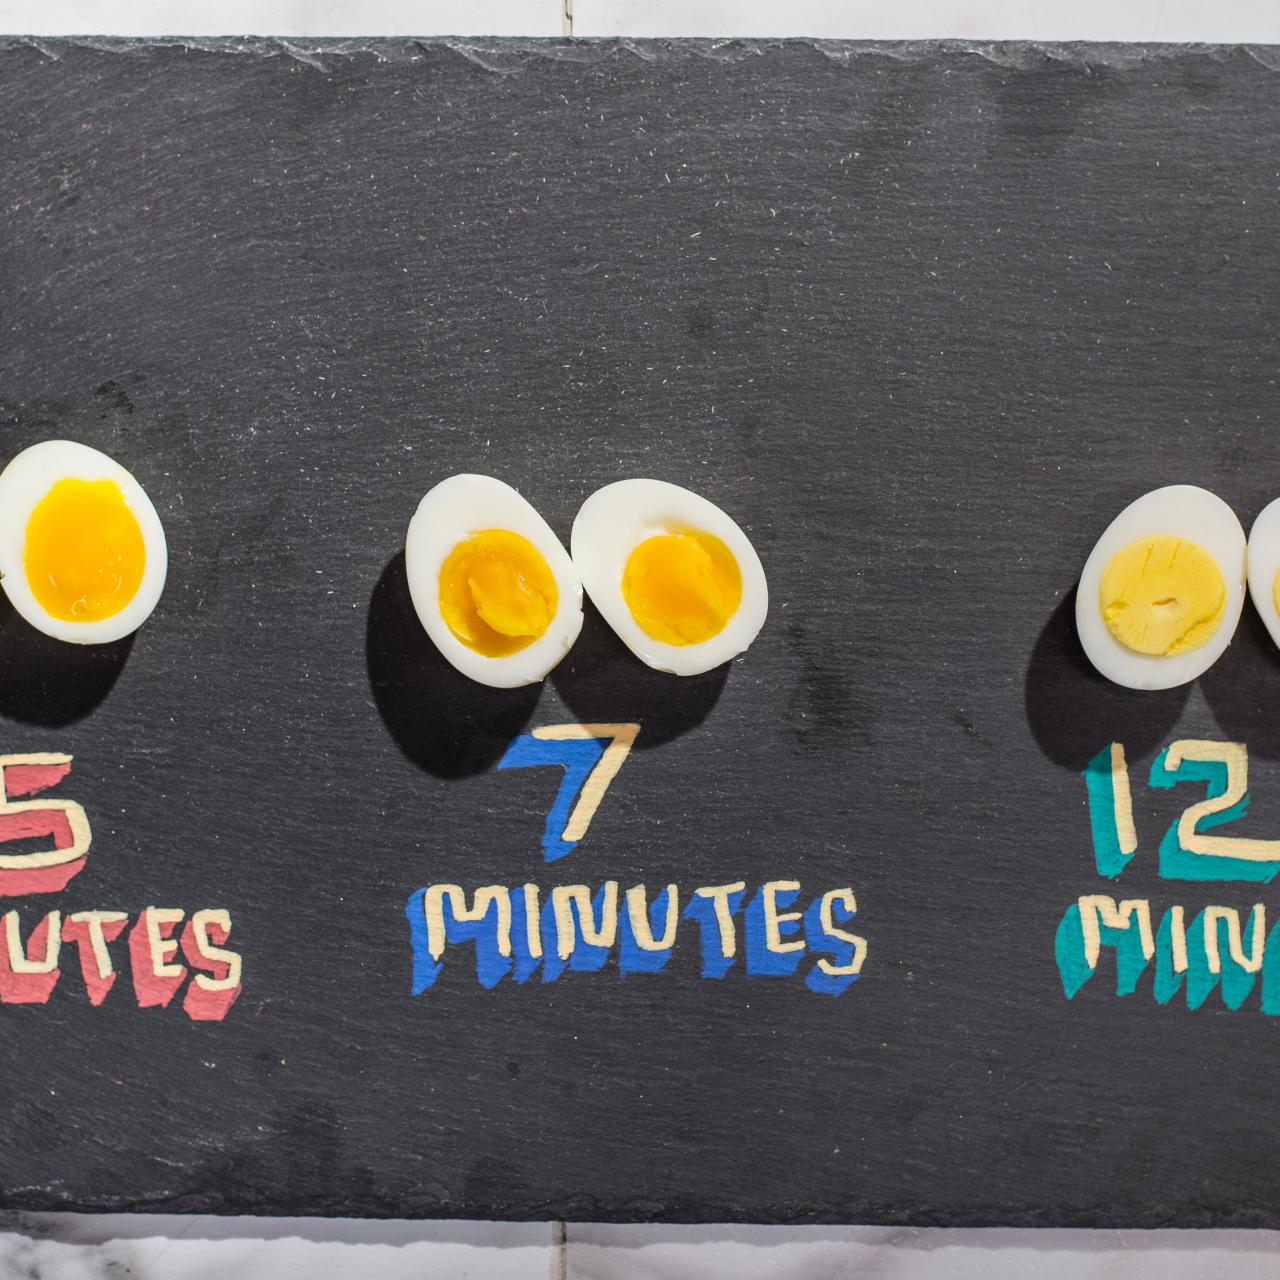 How to Get Perfectly Cooked Eggs Every Time